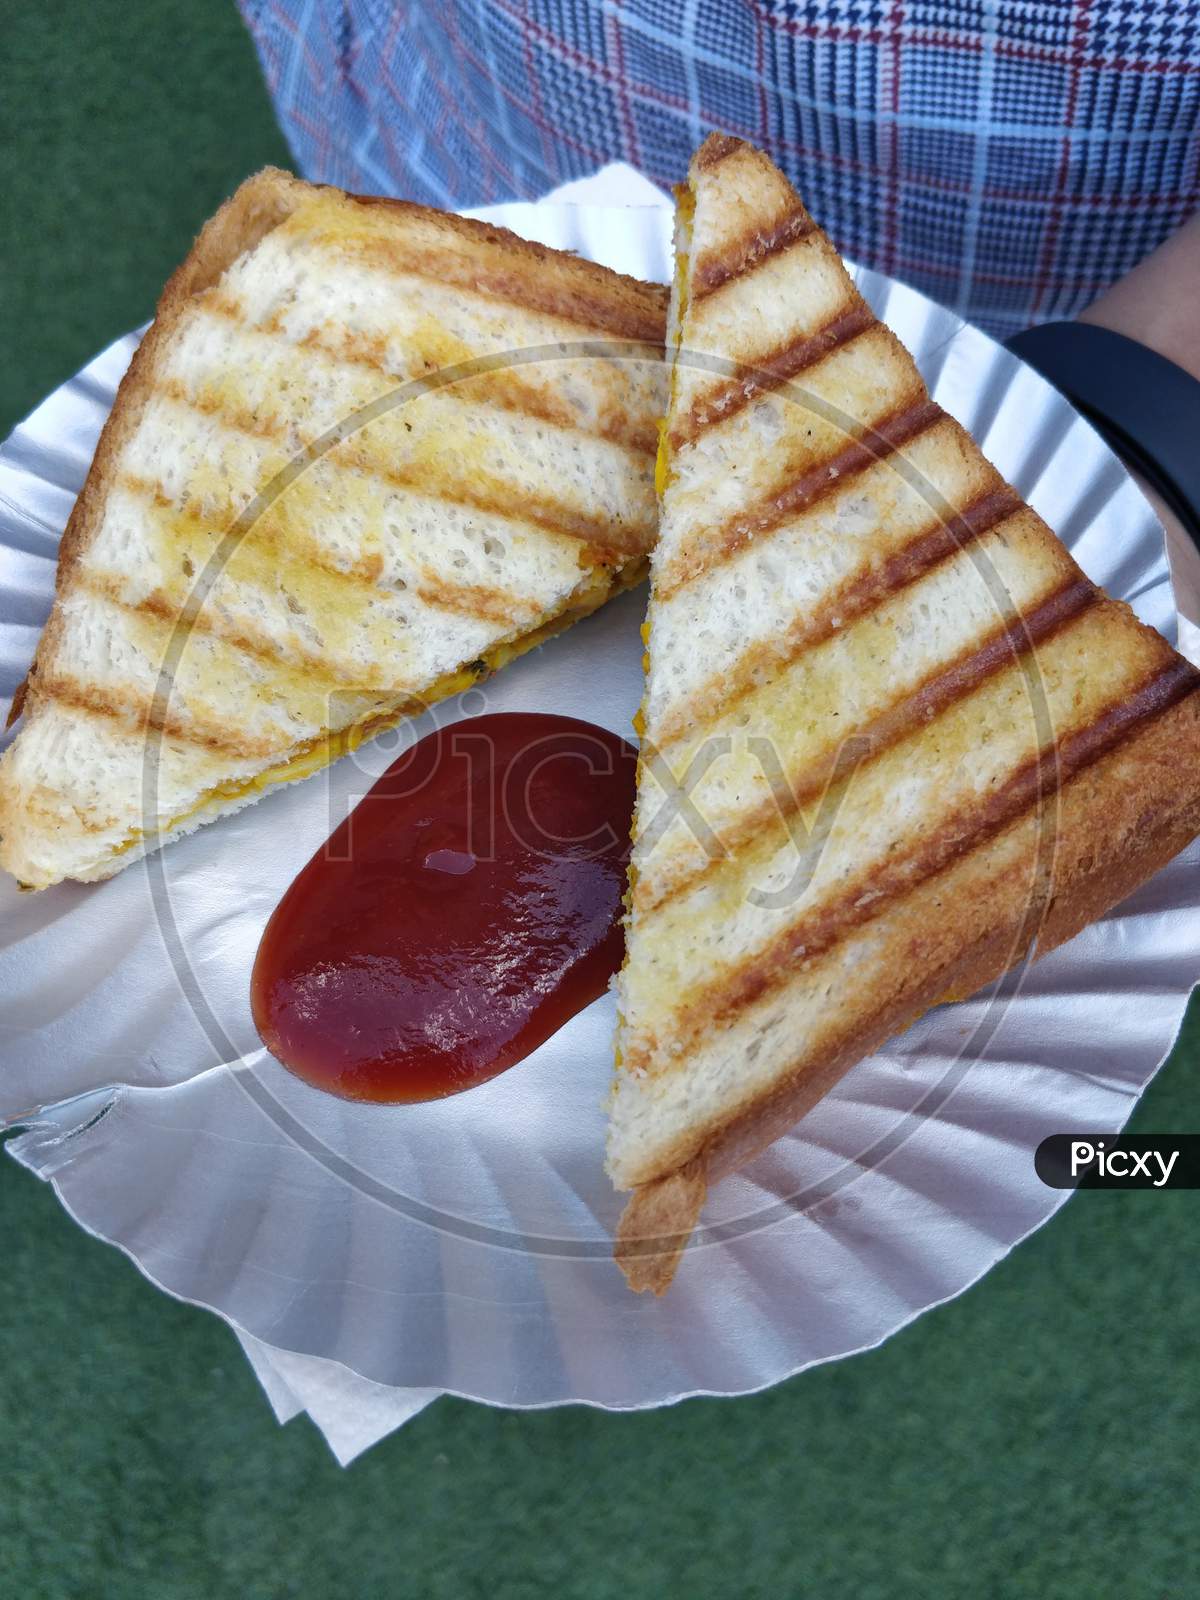 bread toast with ketchup